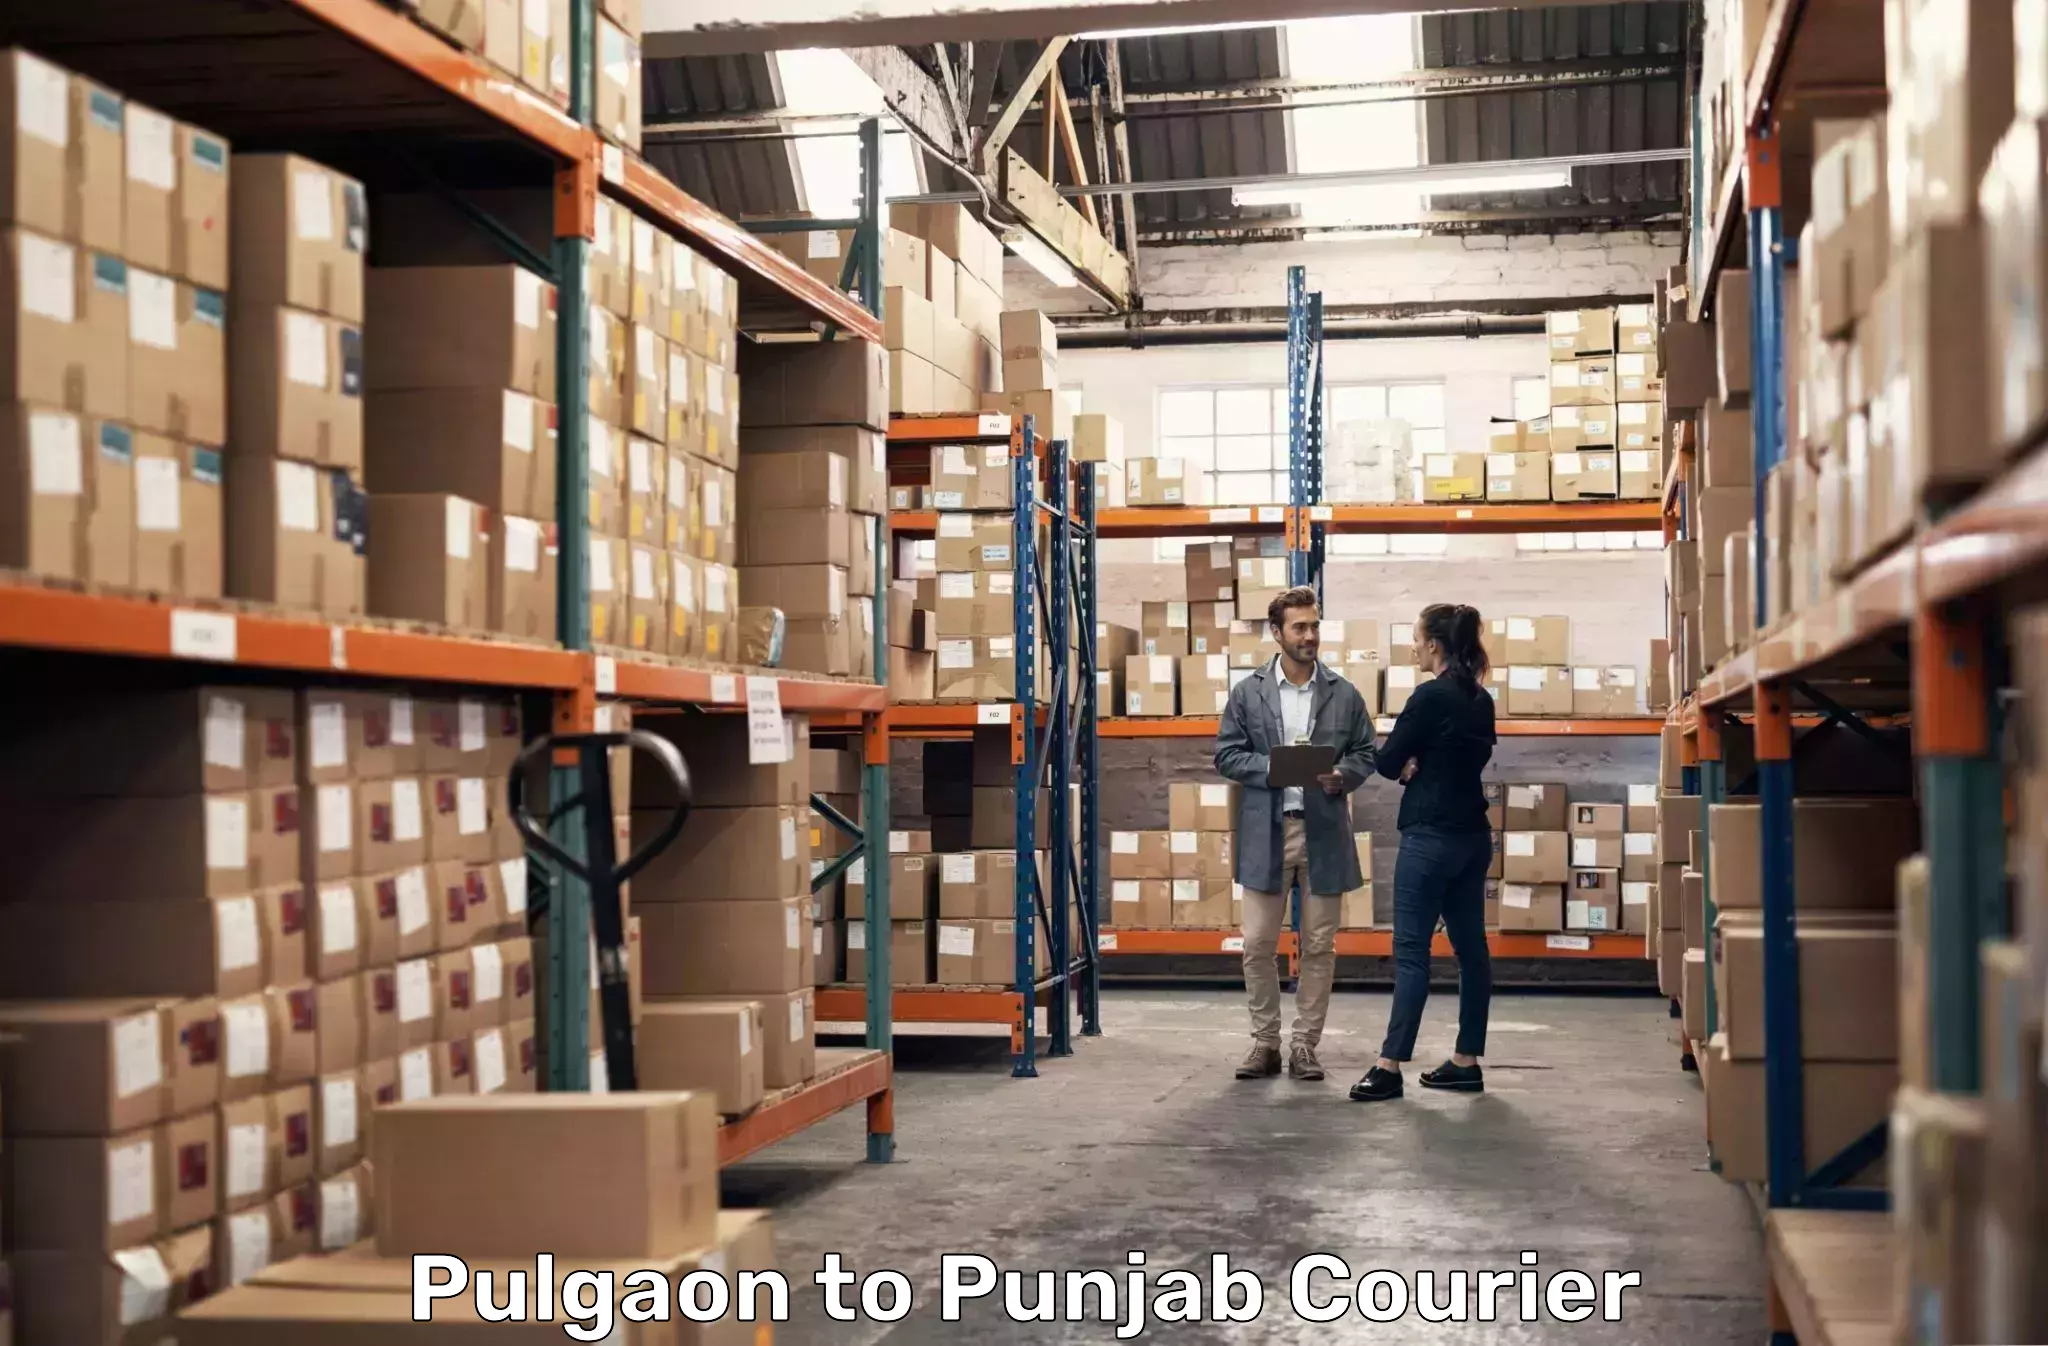 Secure freight services in Pulgaon to Amritsar